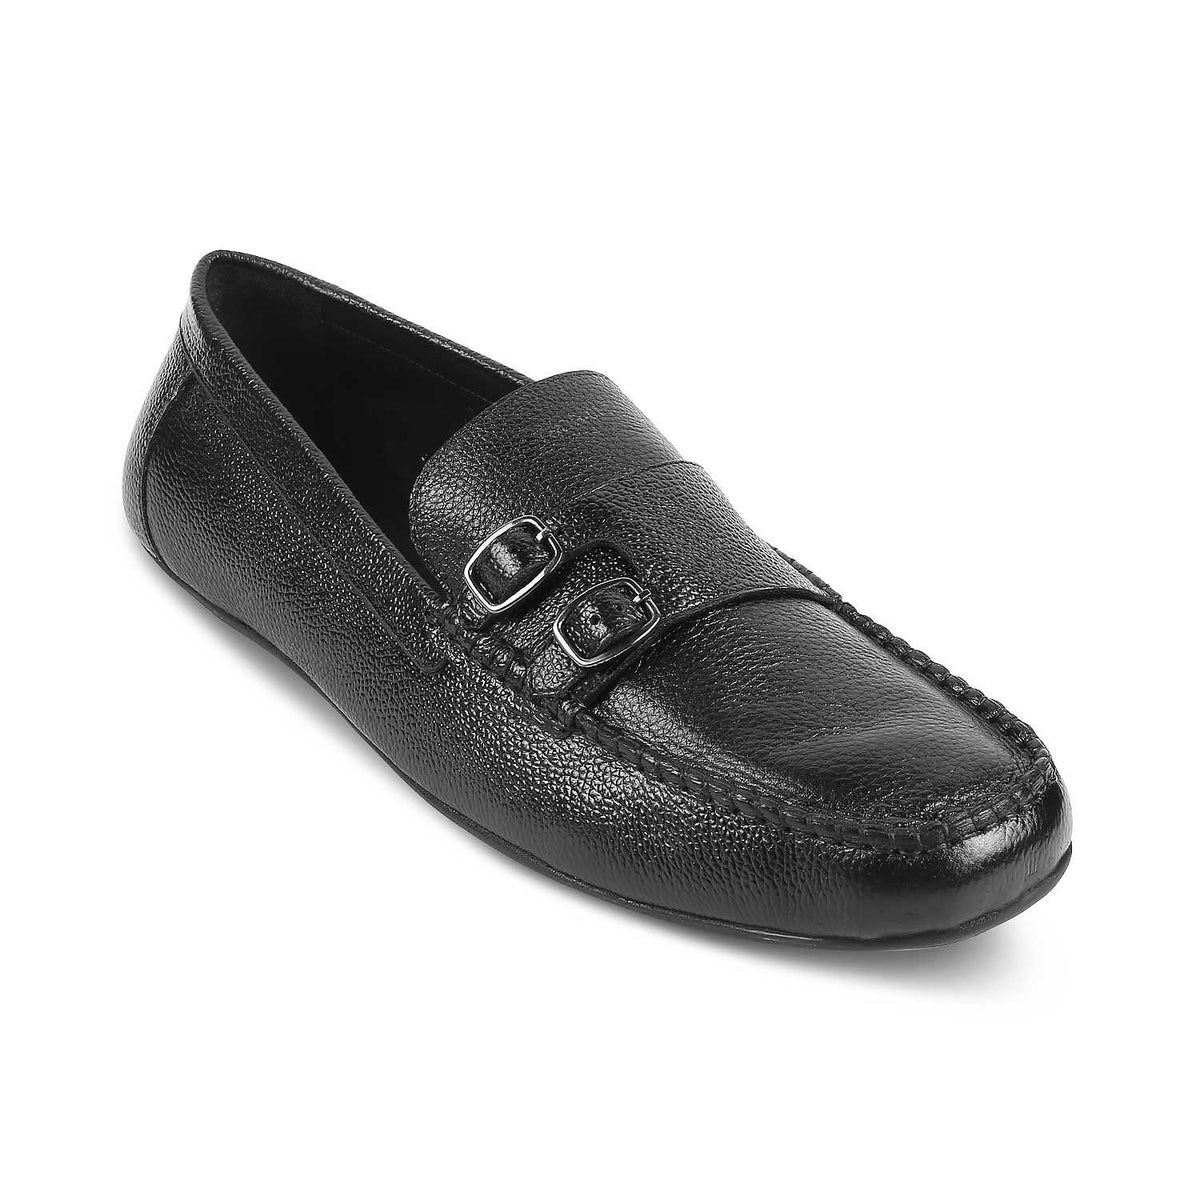 The Roby Black Men's Double Monk Shoes Tresmode